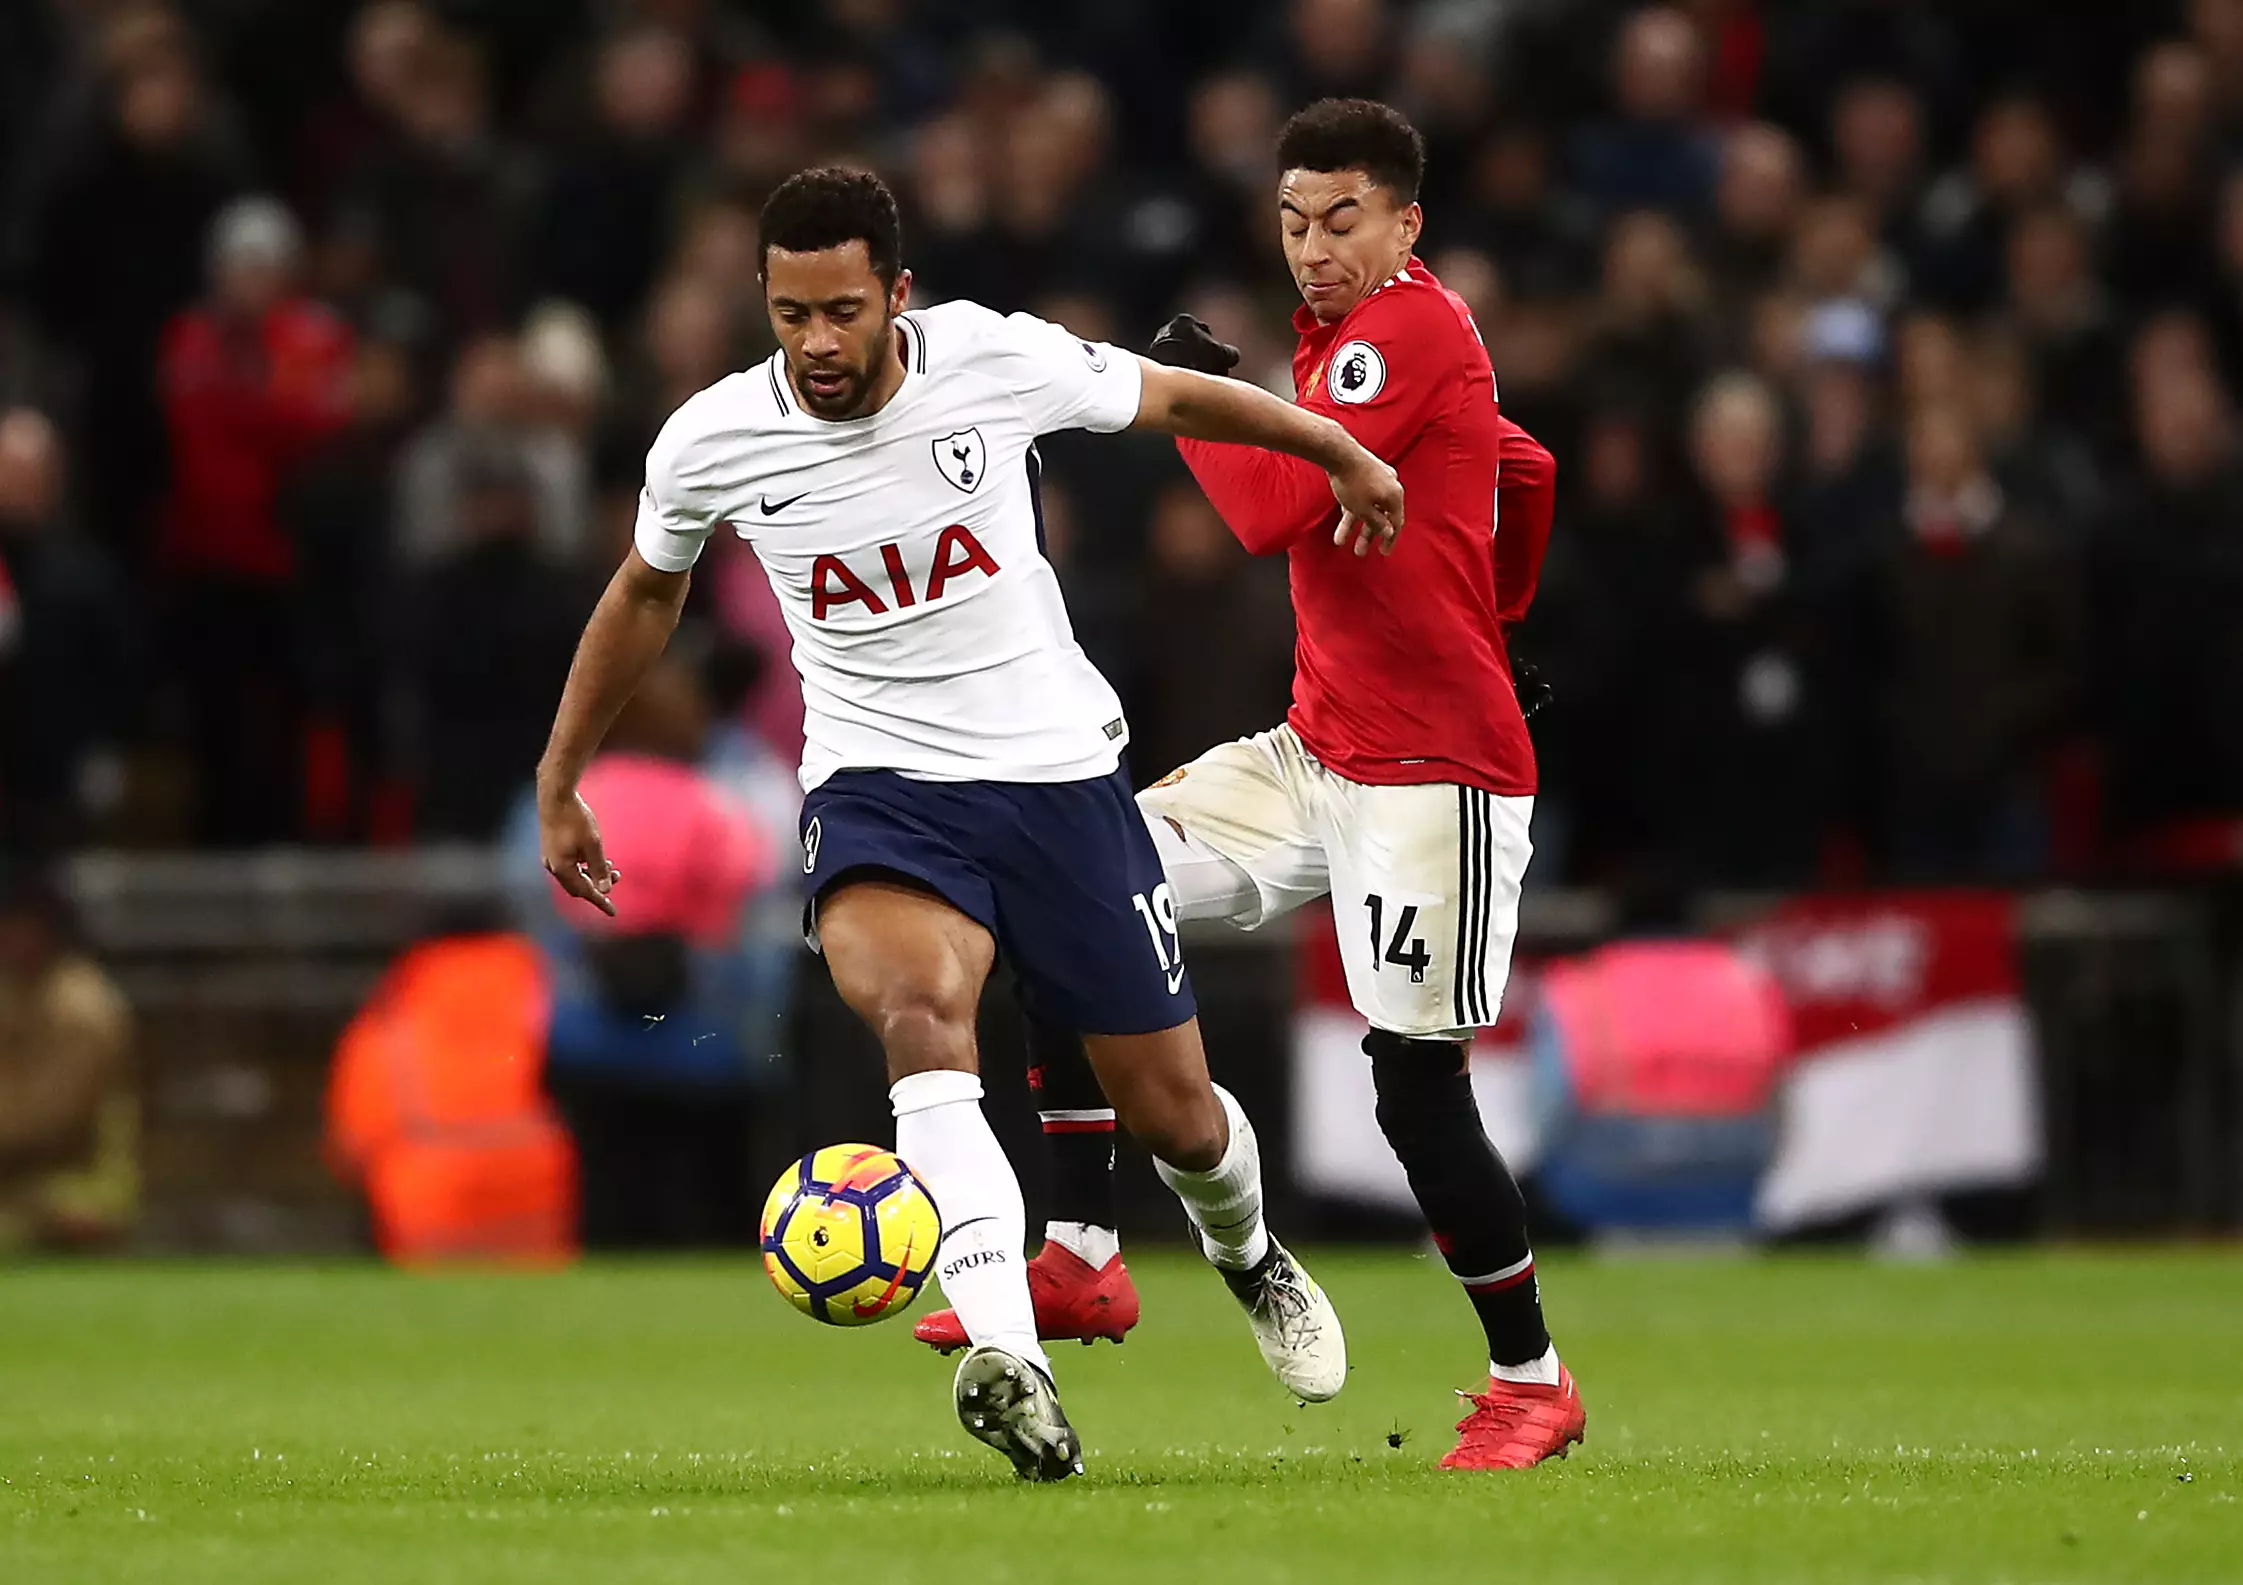 Dembele in action for Spurs against United. Image: PA